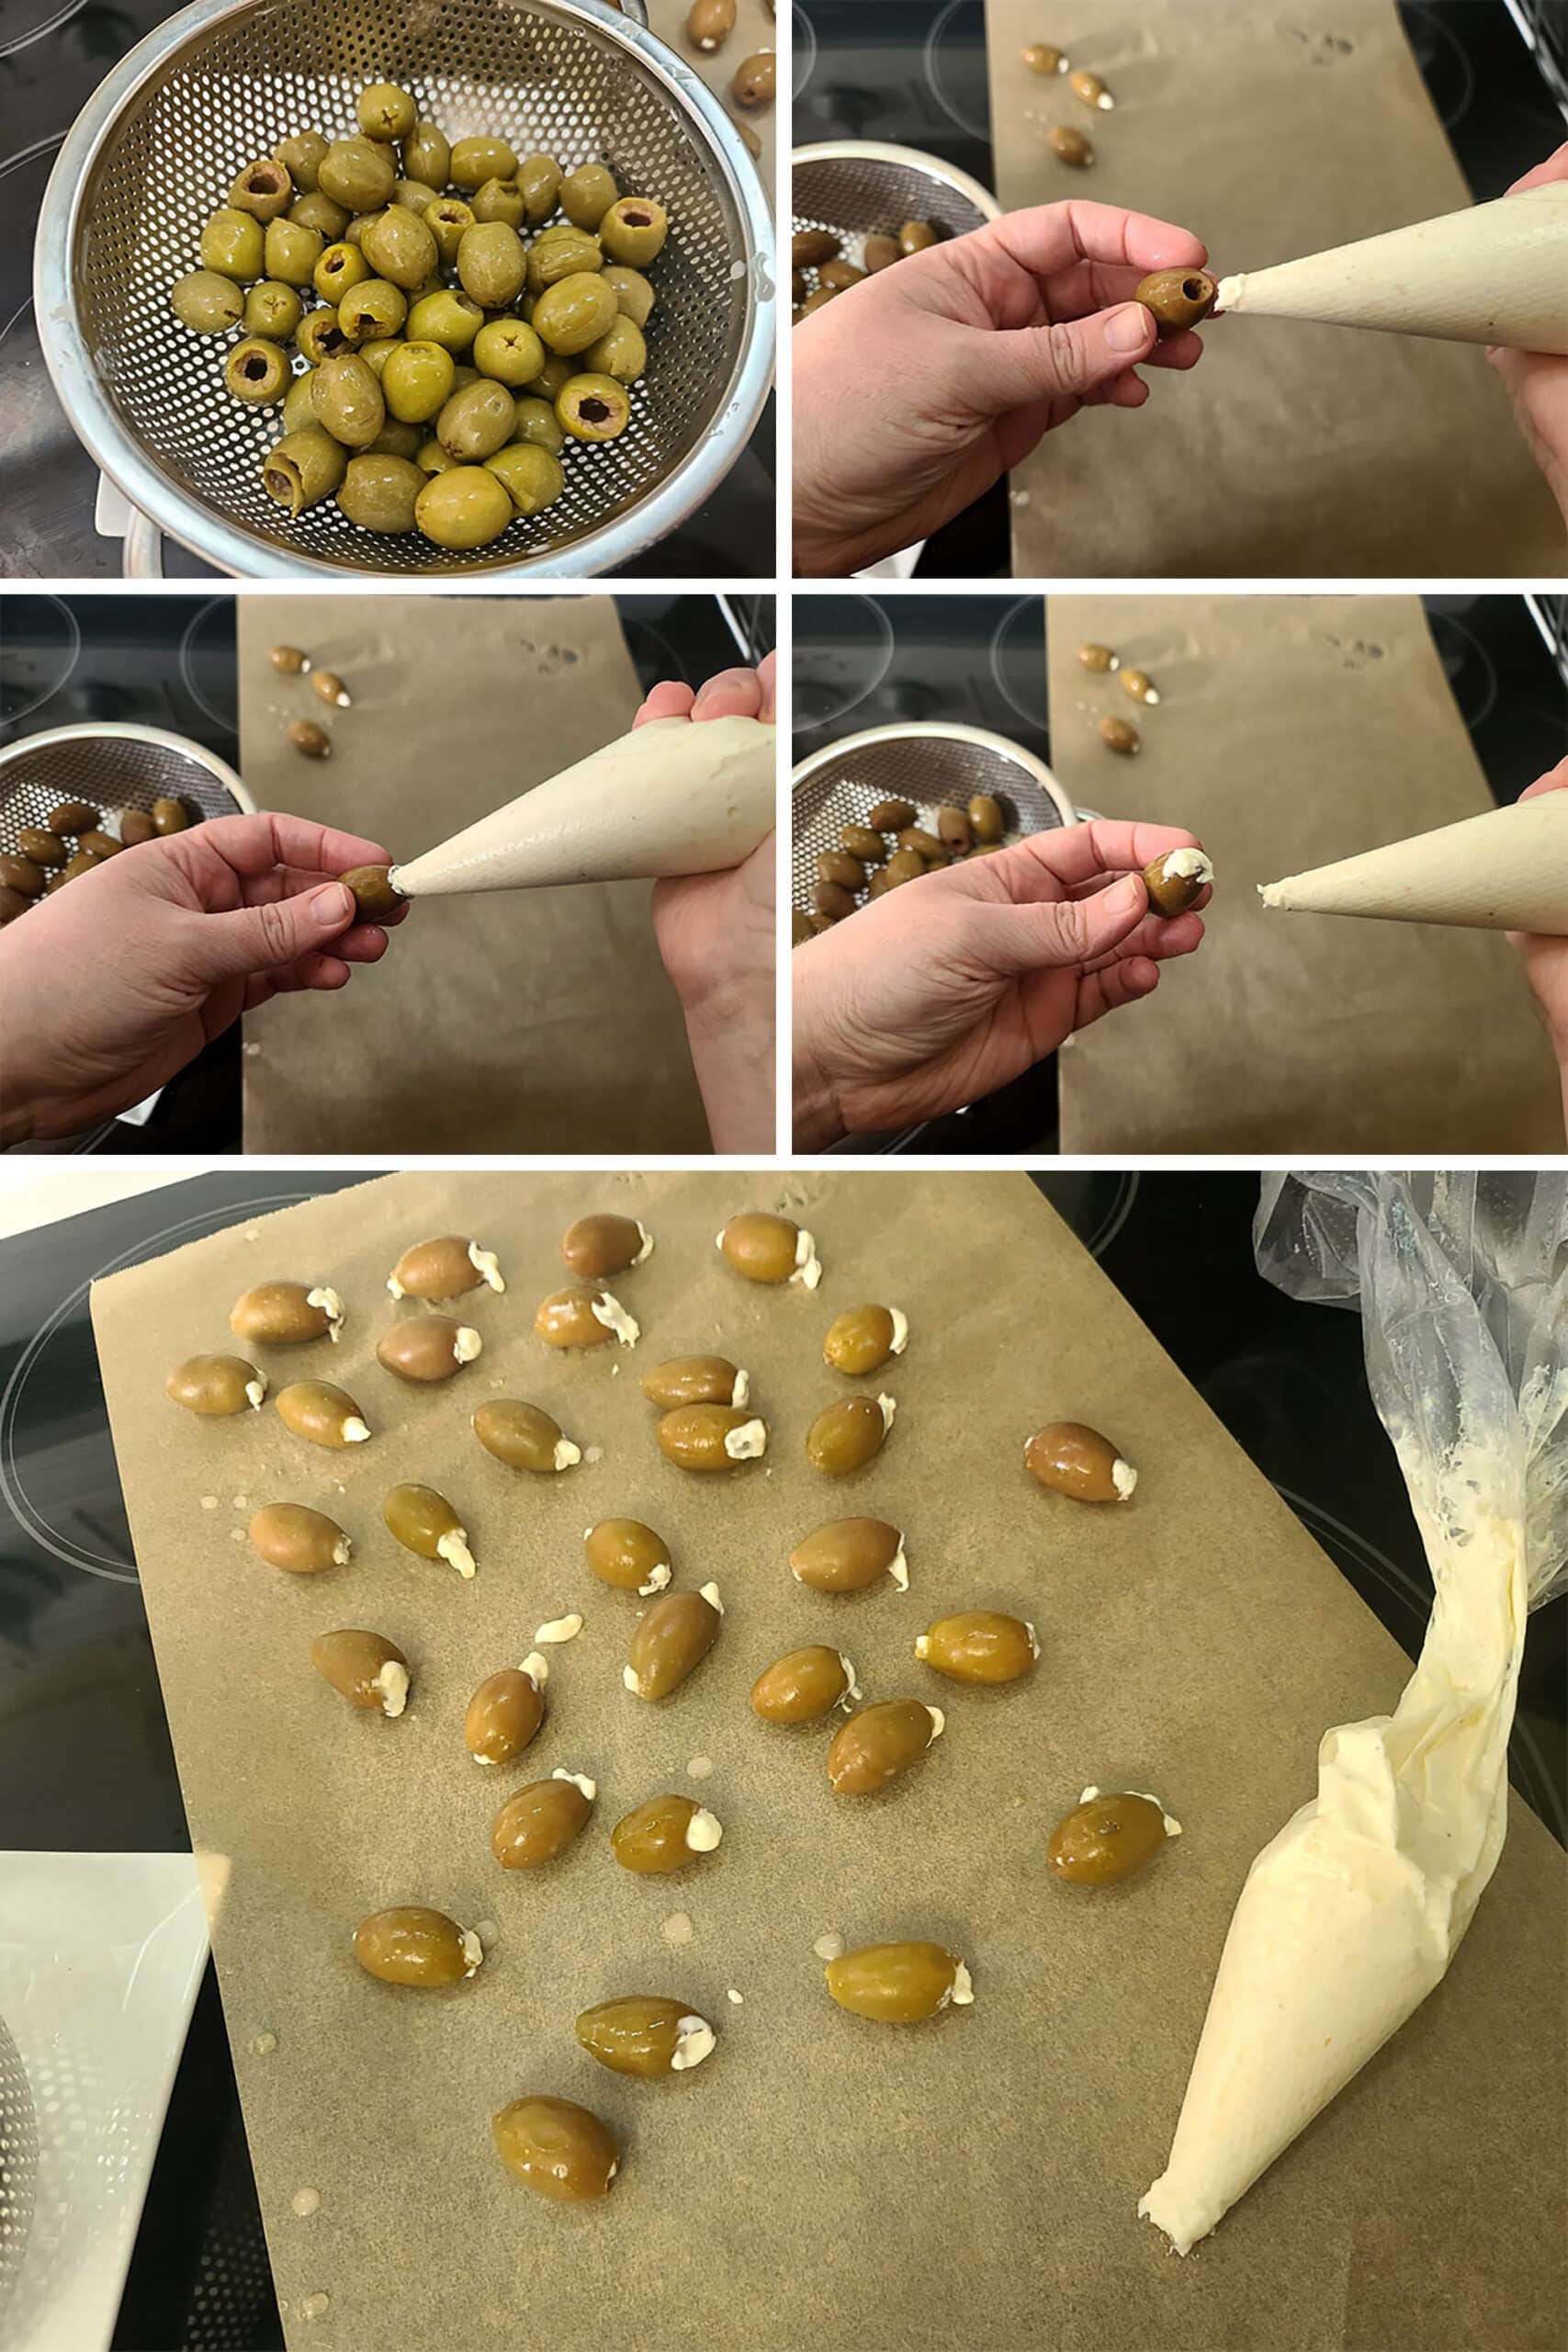 5 part image showing cheese filling being piped into pitted olives.